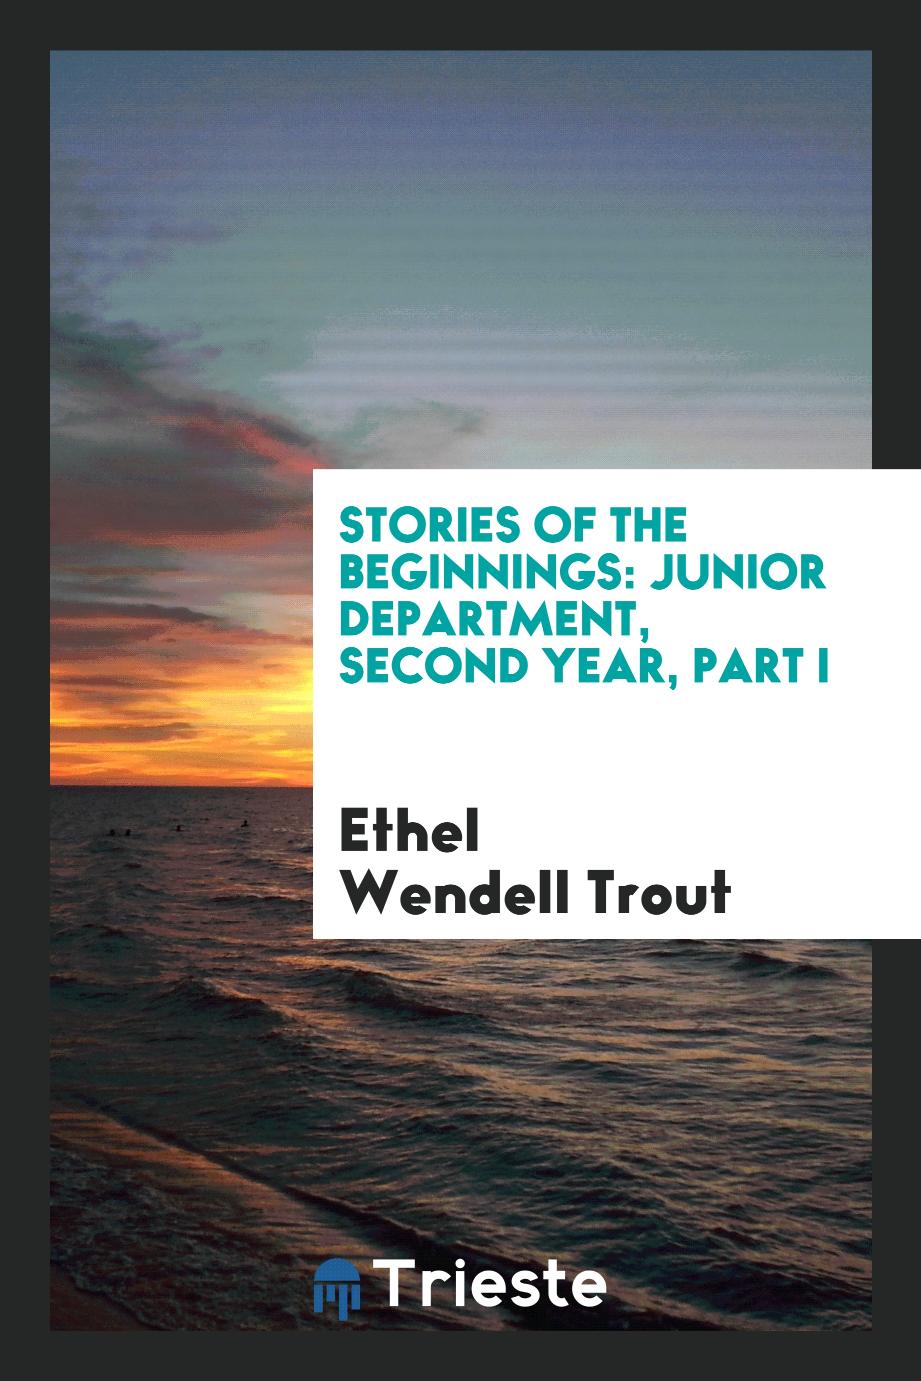 Stories of the Beginnings: Junior Department, Second Year, Part I